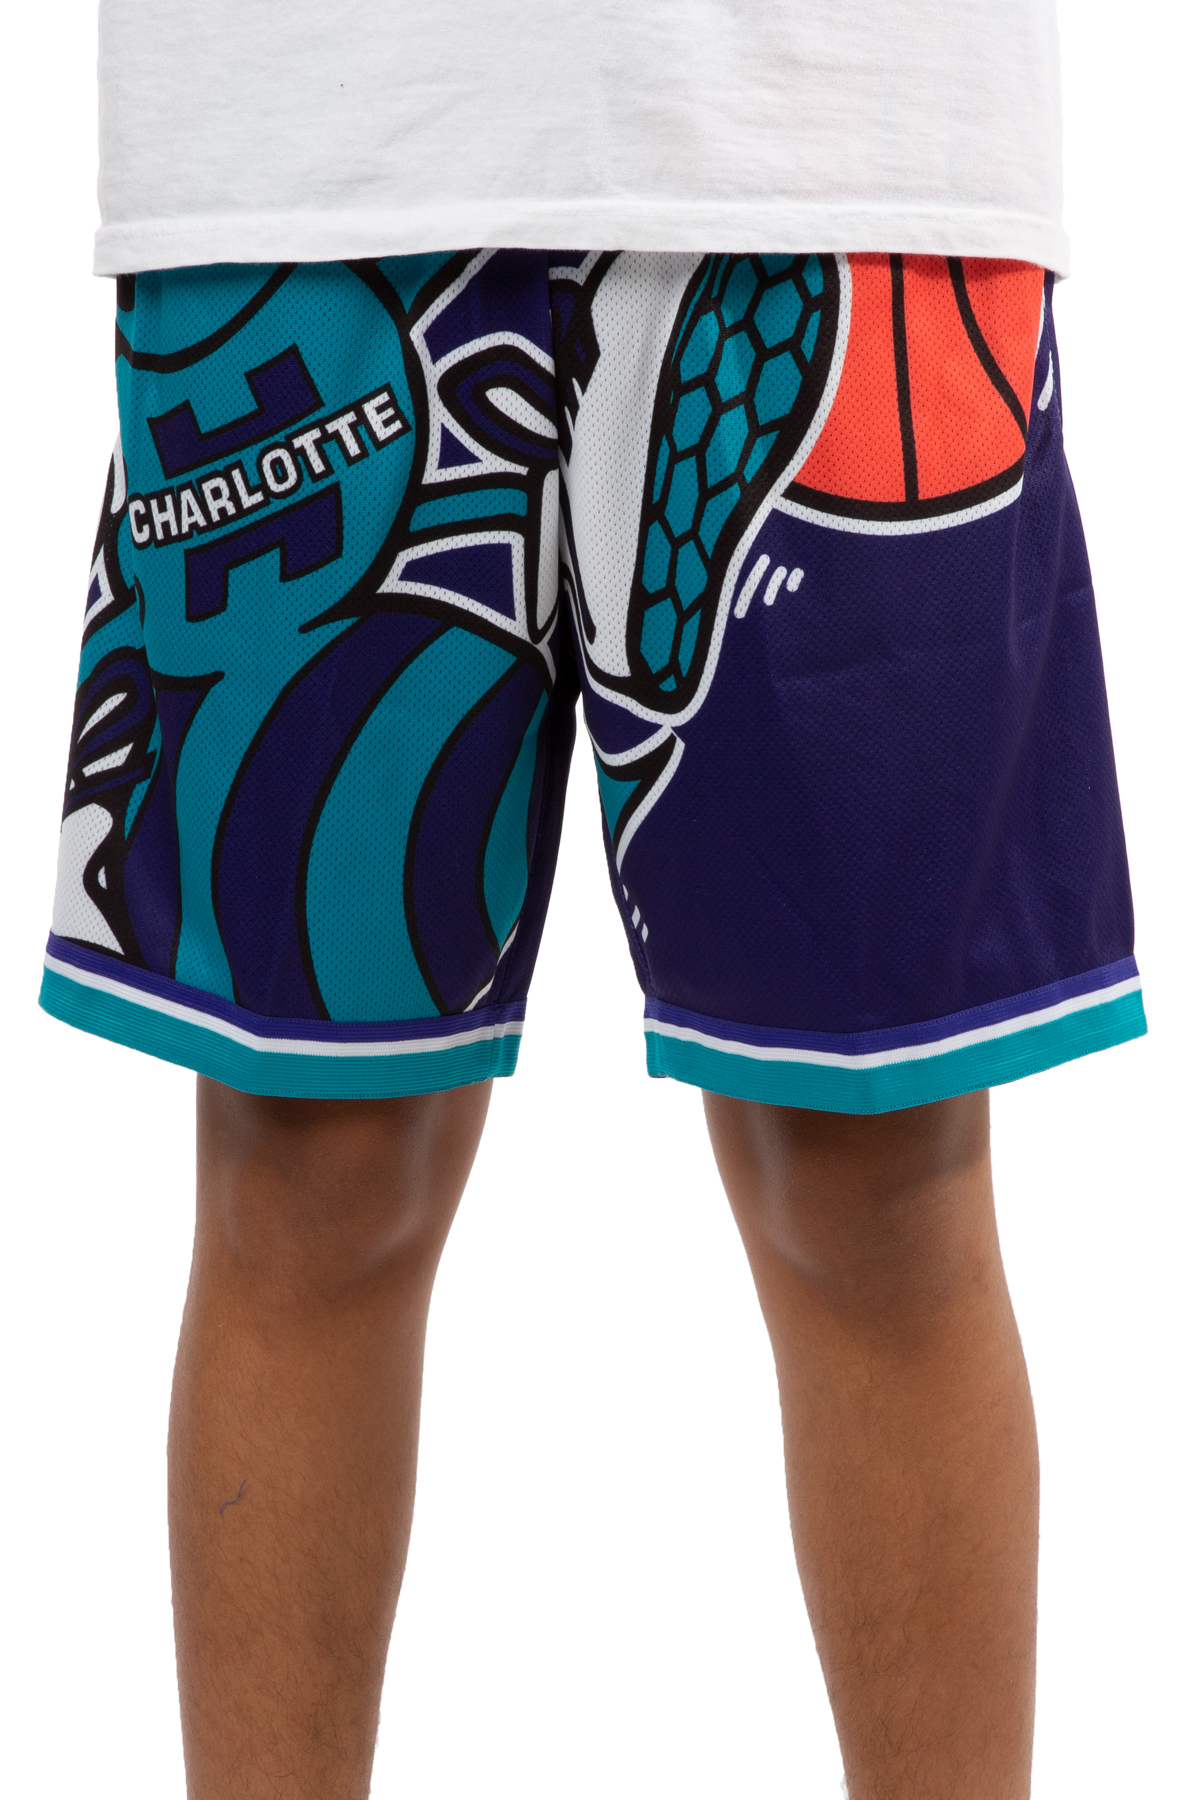 SAN DIEGO CLIPPERS BIG FACE SHORTS SHORBW19069-SCLLTBL